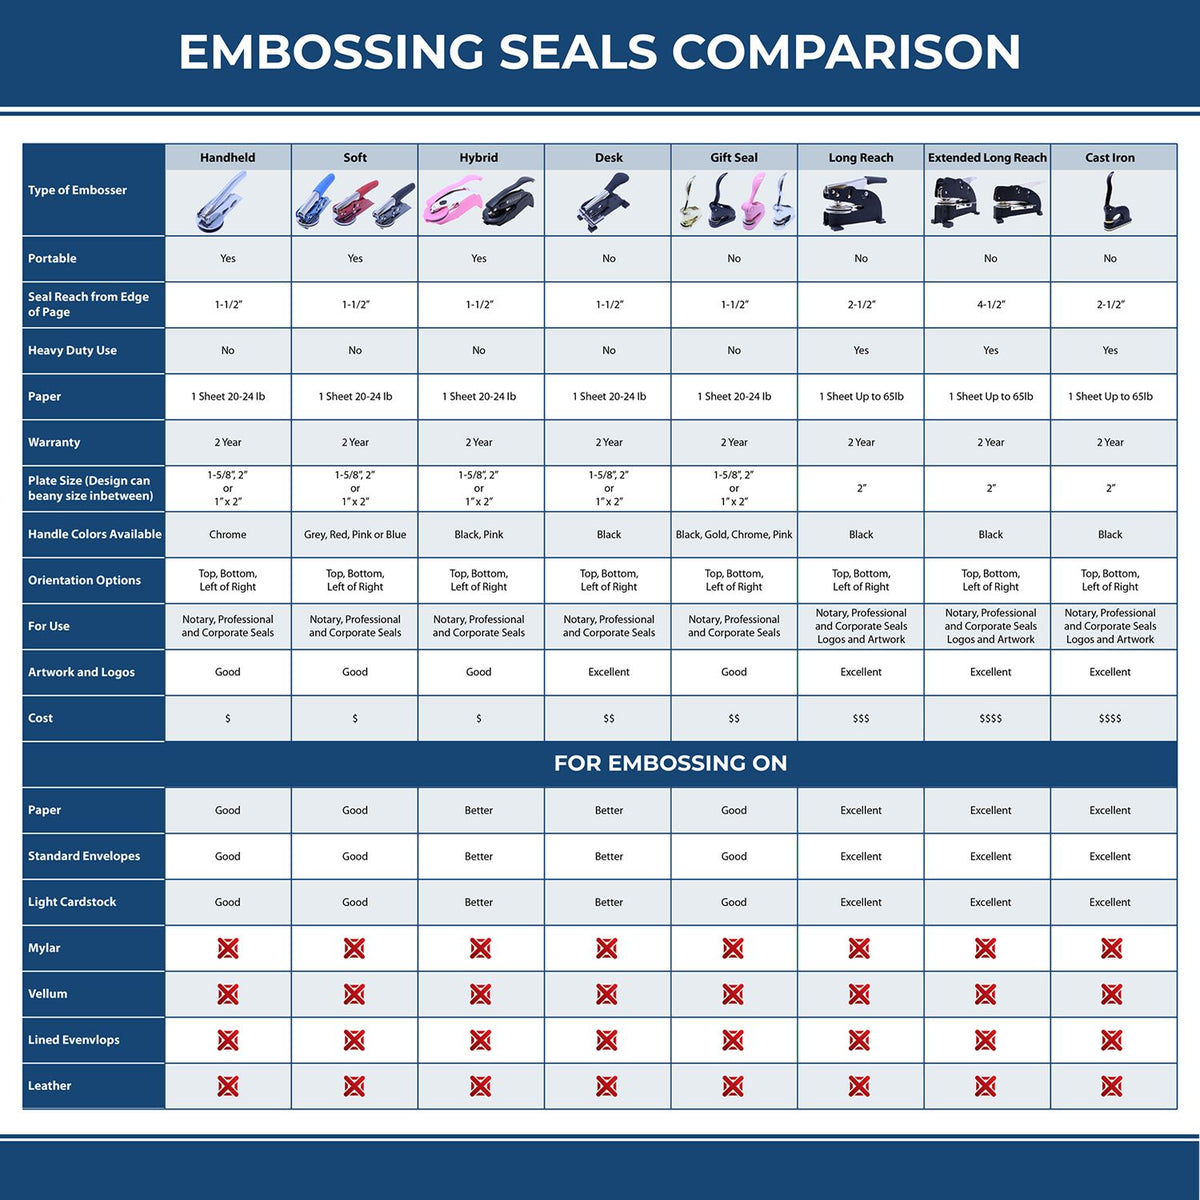 A comparison chart for the different types of mount models available for the Long Reach Kentucky Land Surveyor Seal.